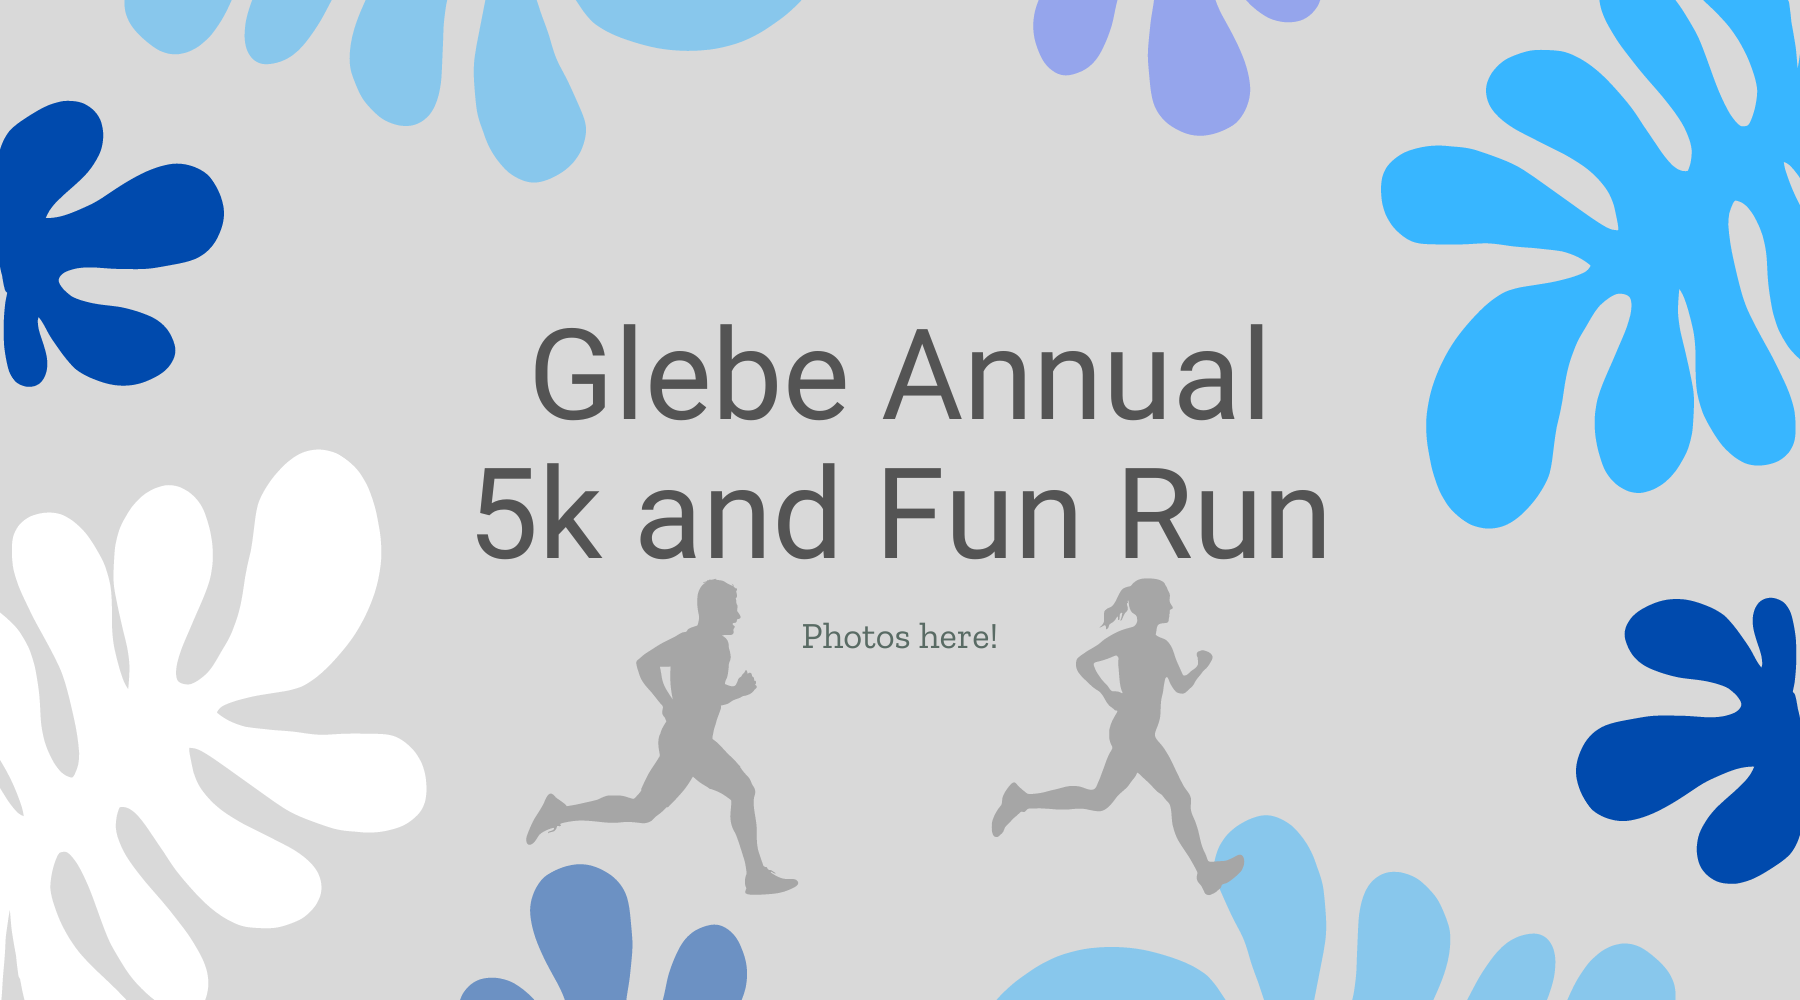 Glebe Annual 5k and Fun run with blues, grays, and whites